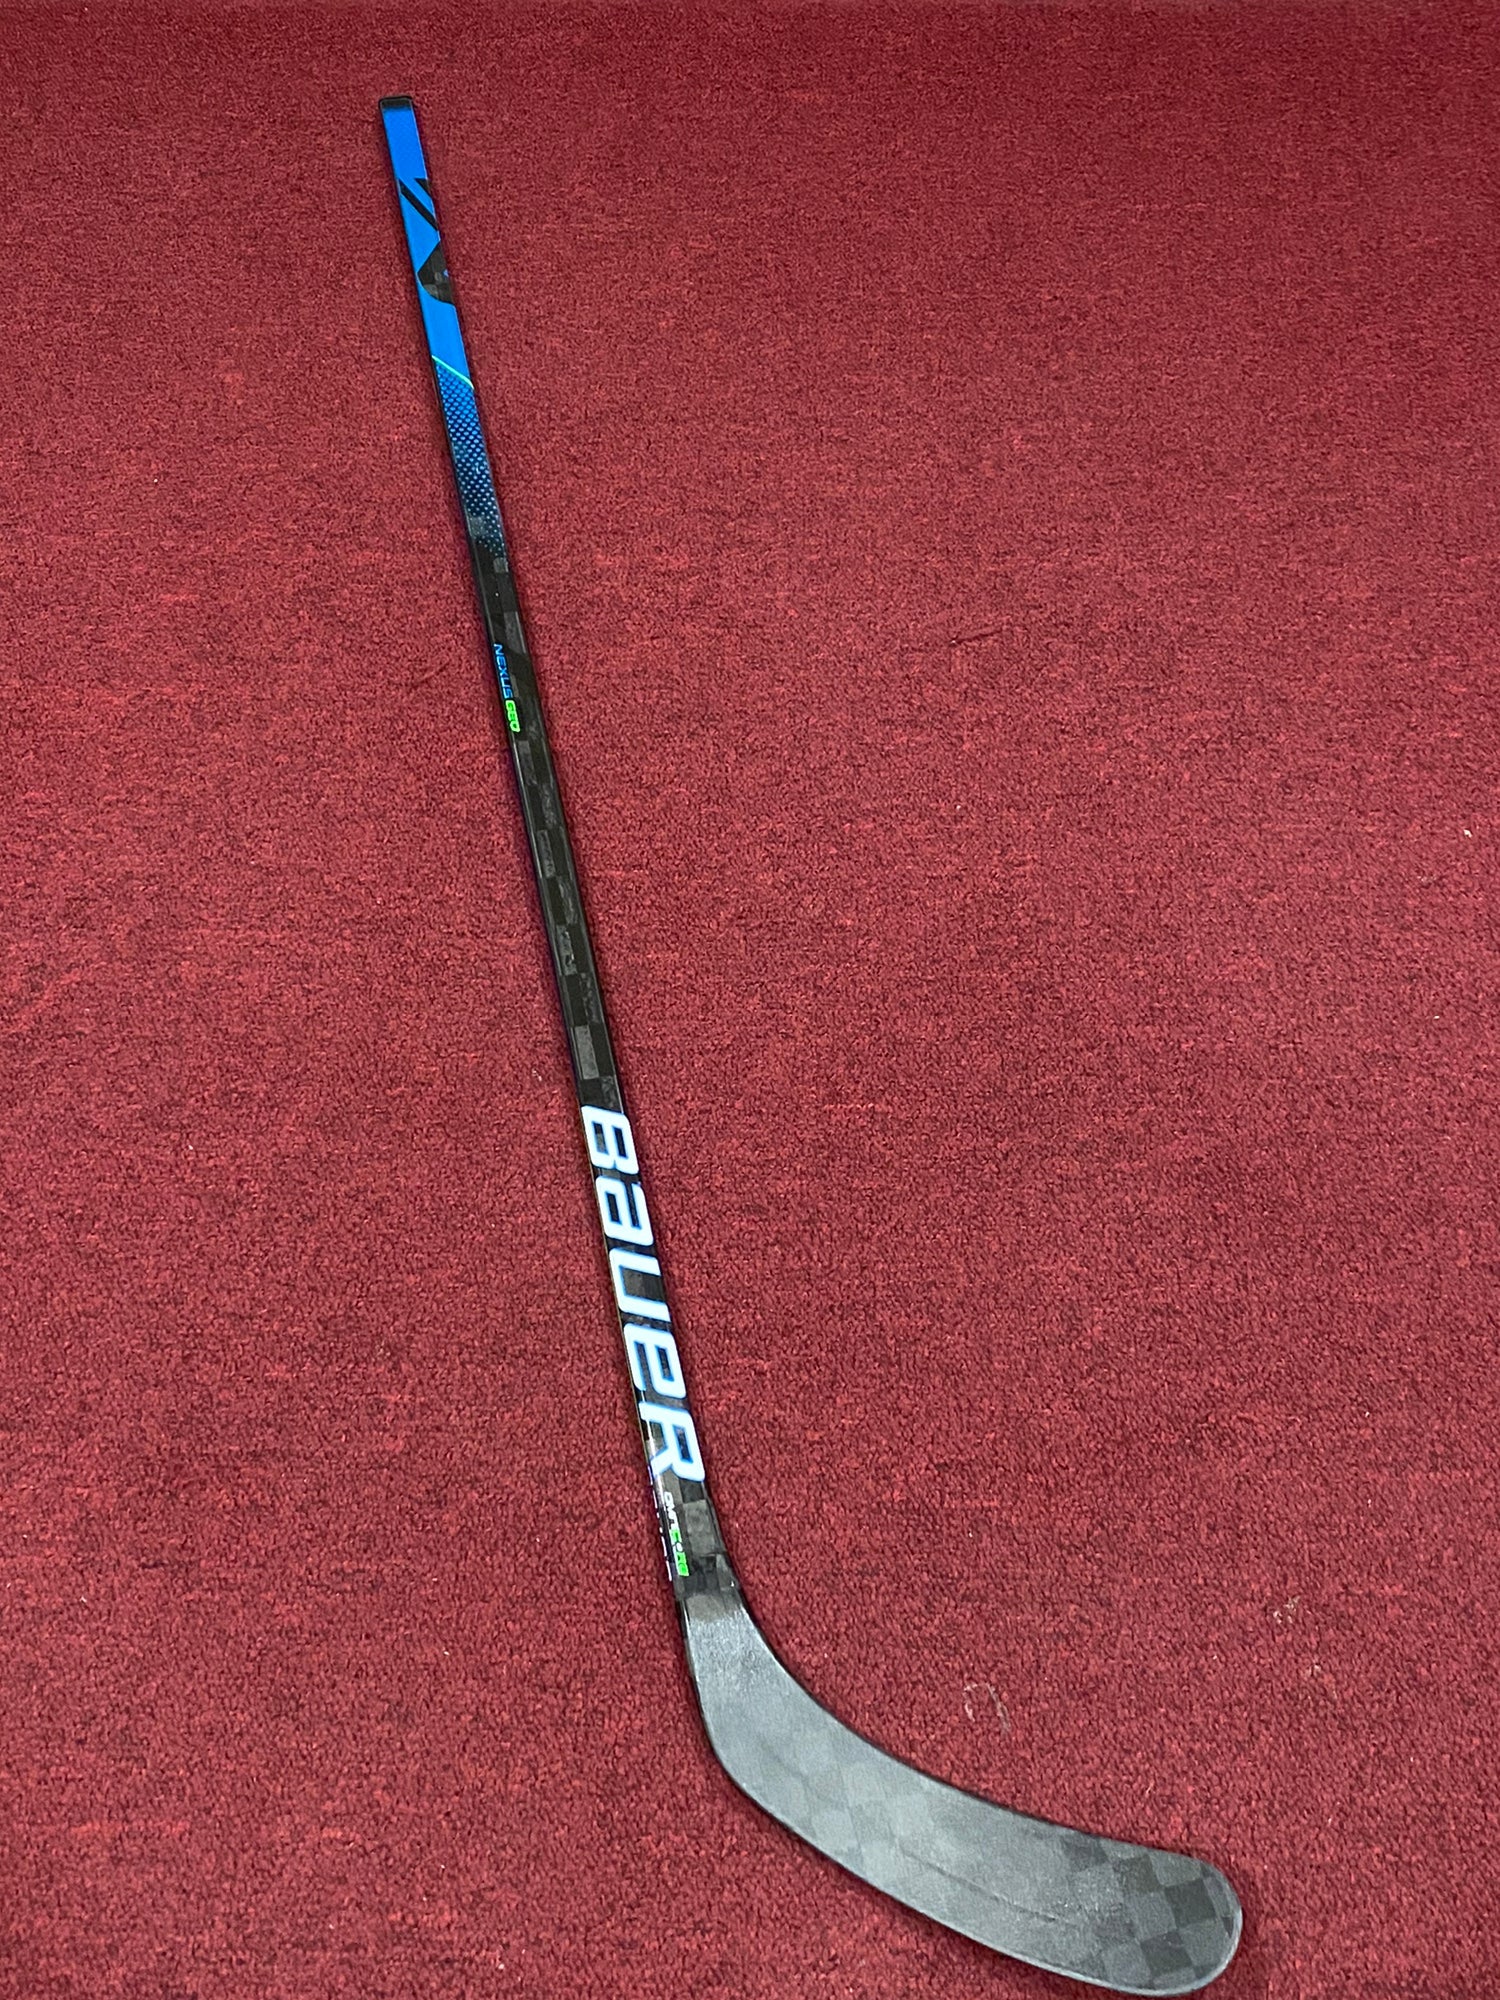 Details about   New Left Hand Ice Hockey Stick Summit Hockey S92 Ovechkin Curve 87 Flex NO GRIP 